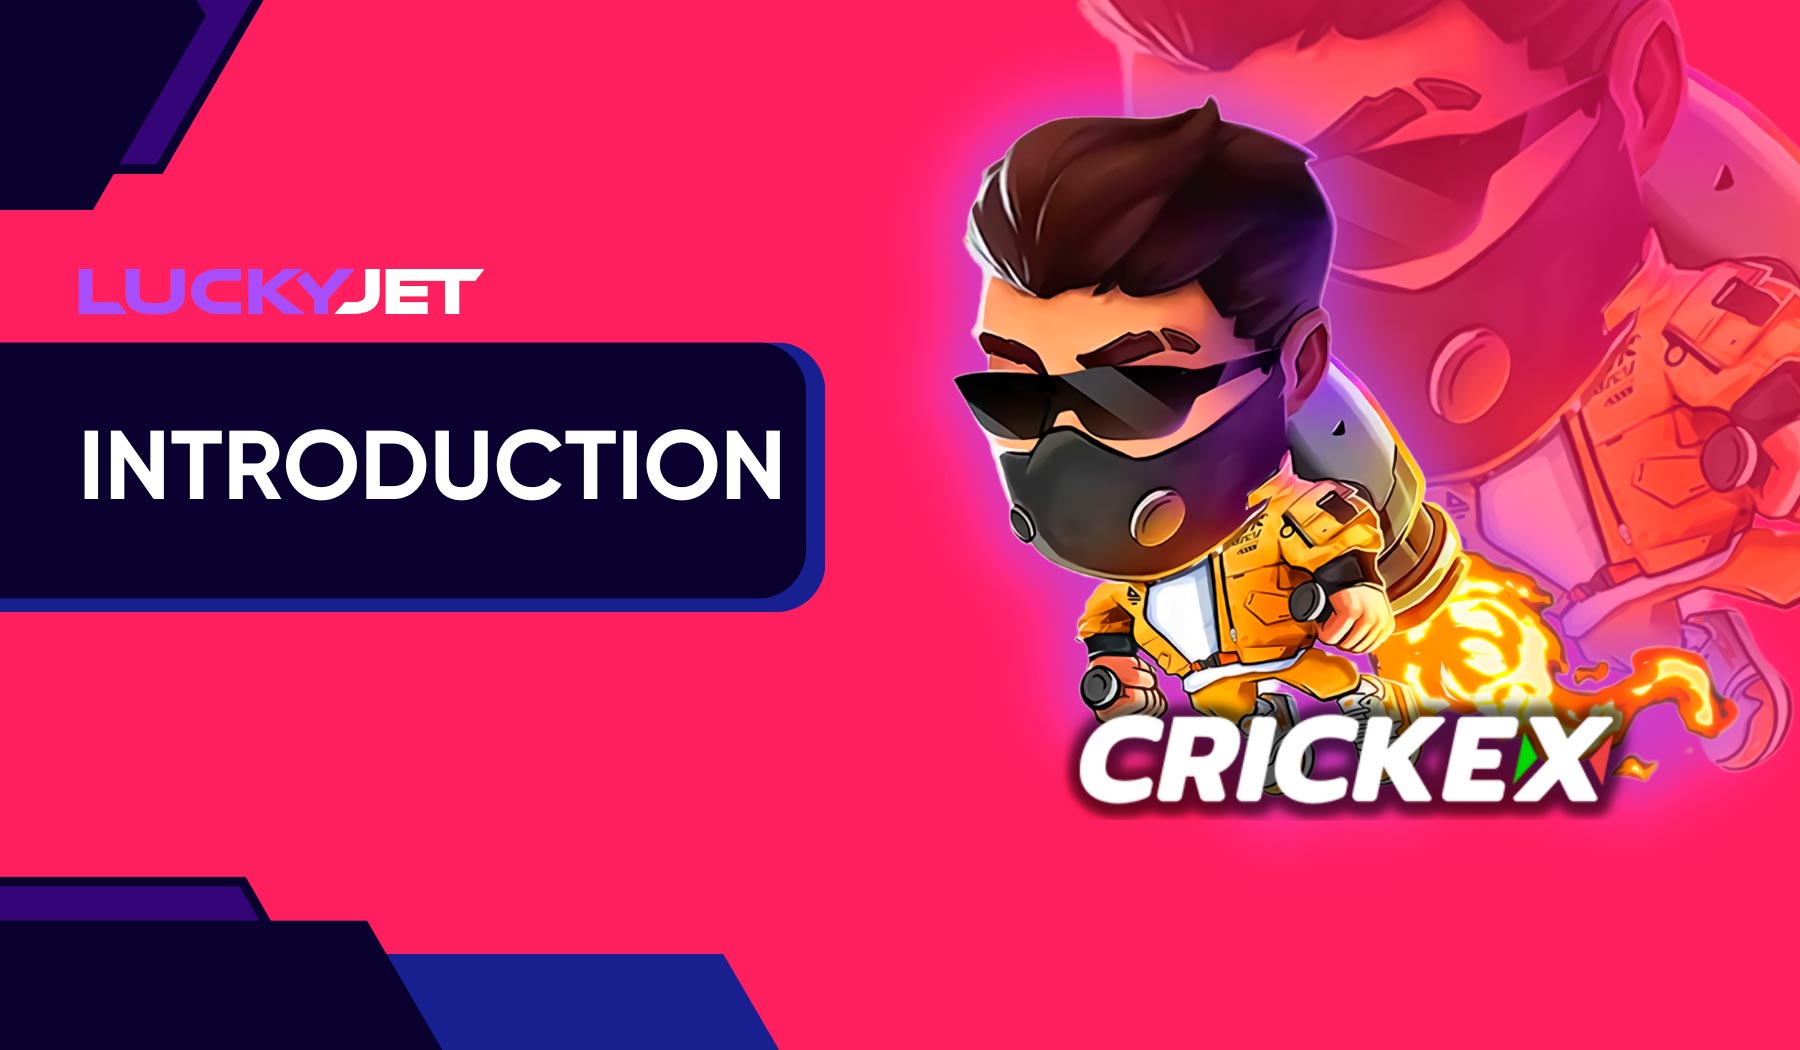 Crickex represents a trend in gambling in the form of Lucky Jet